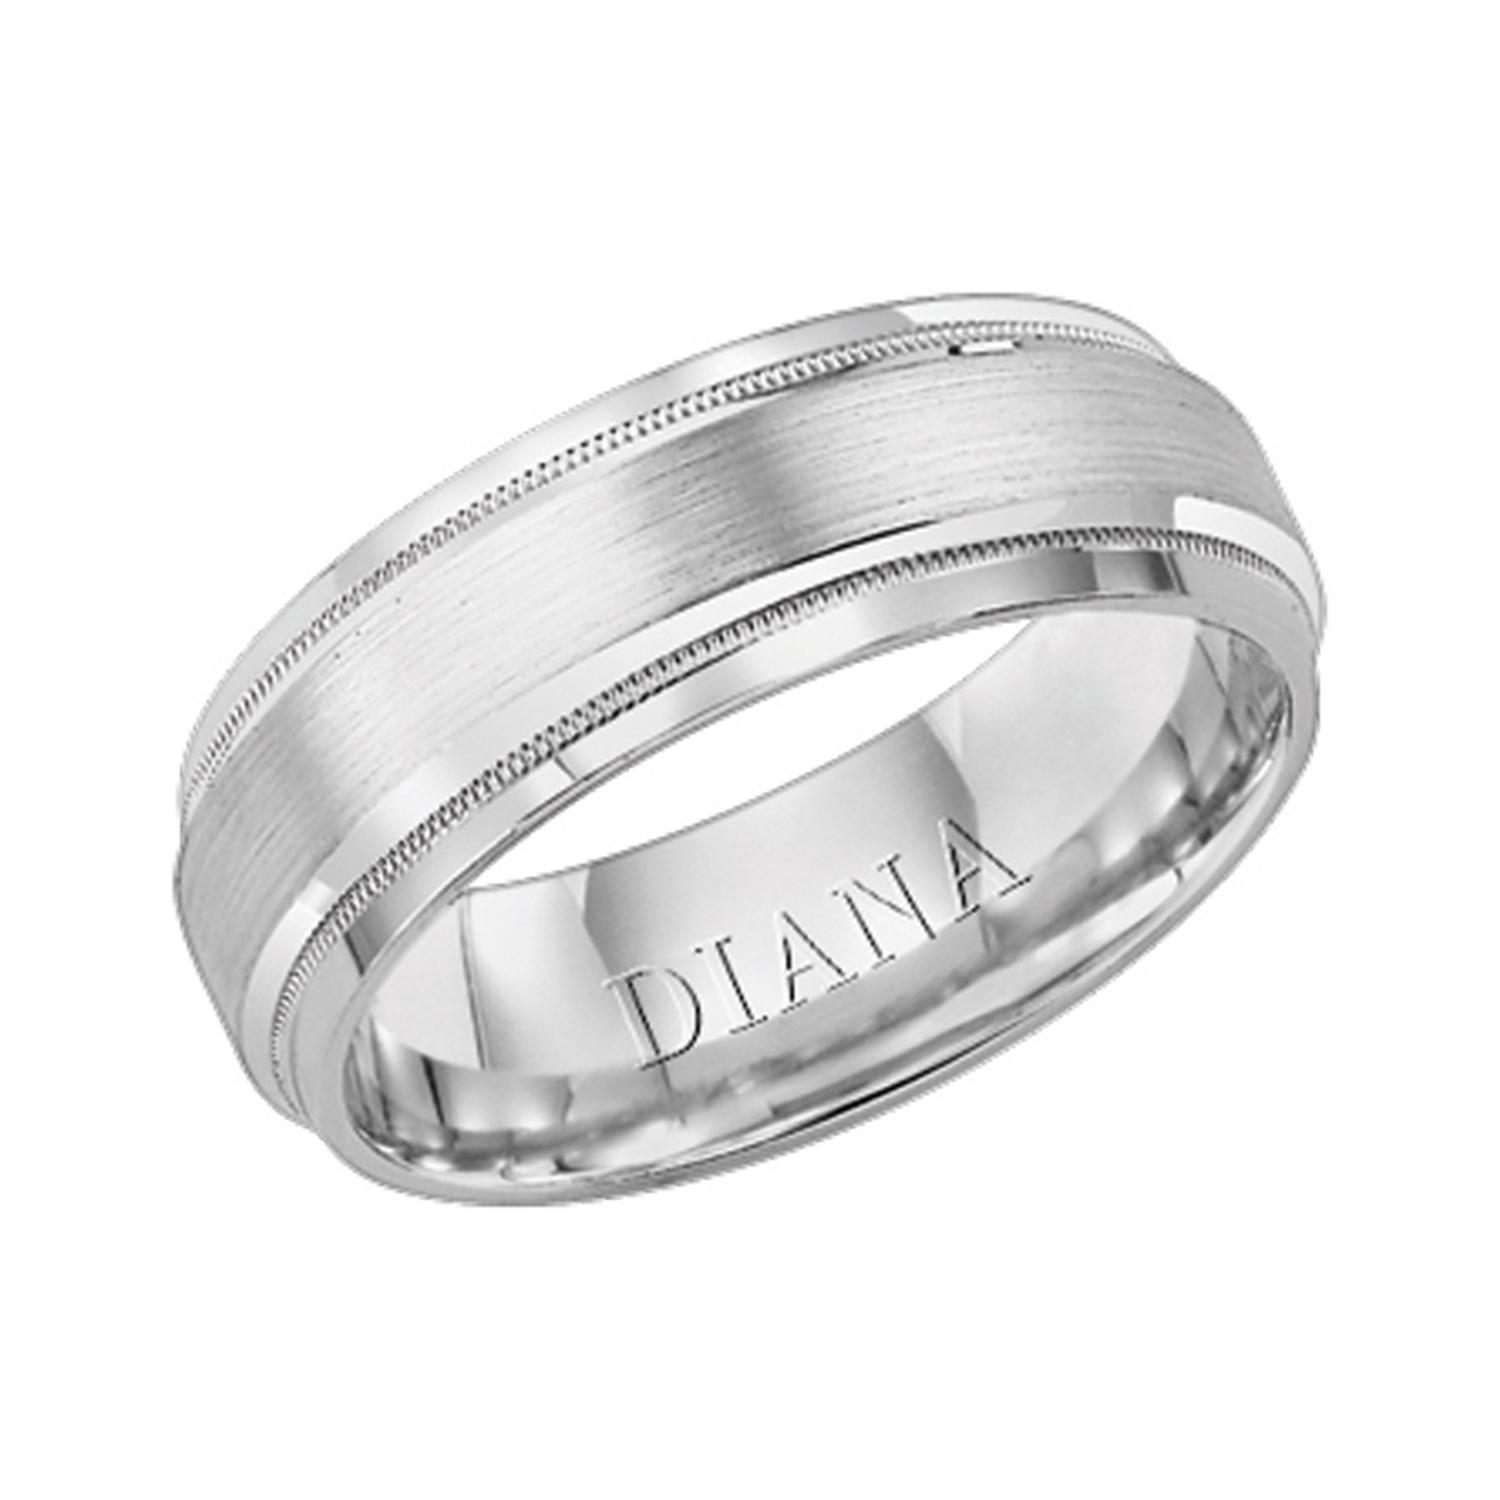 Wedding Band With Milgrain Accent